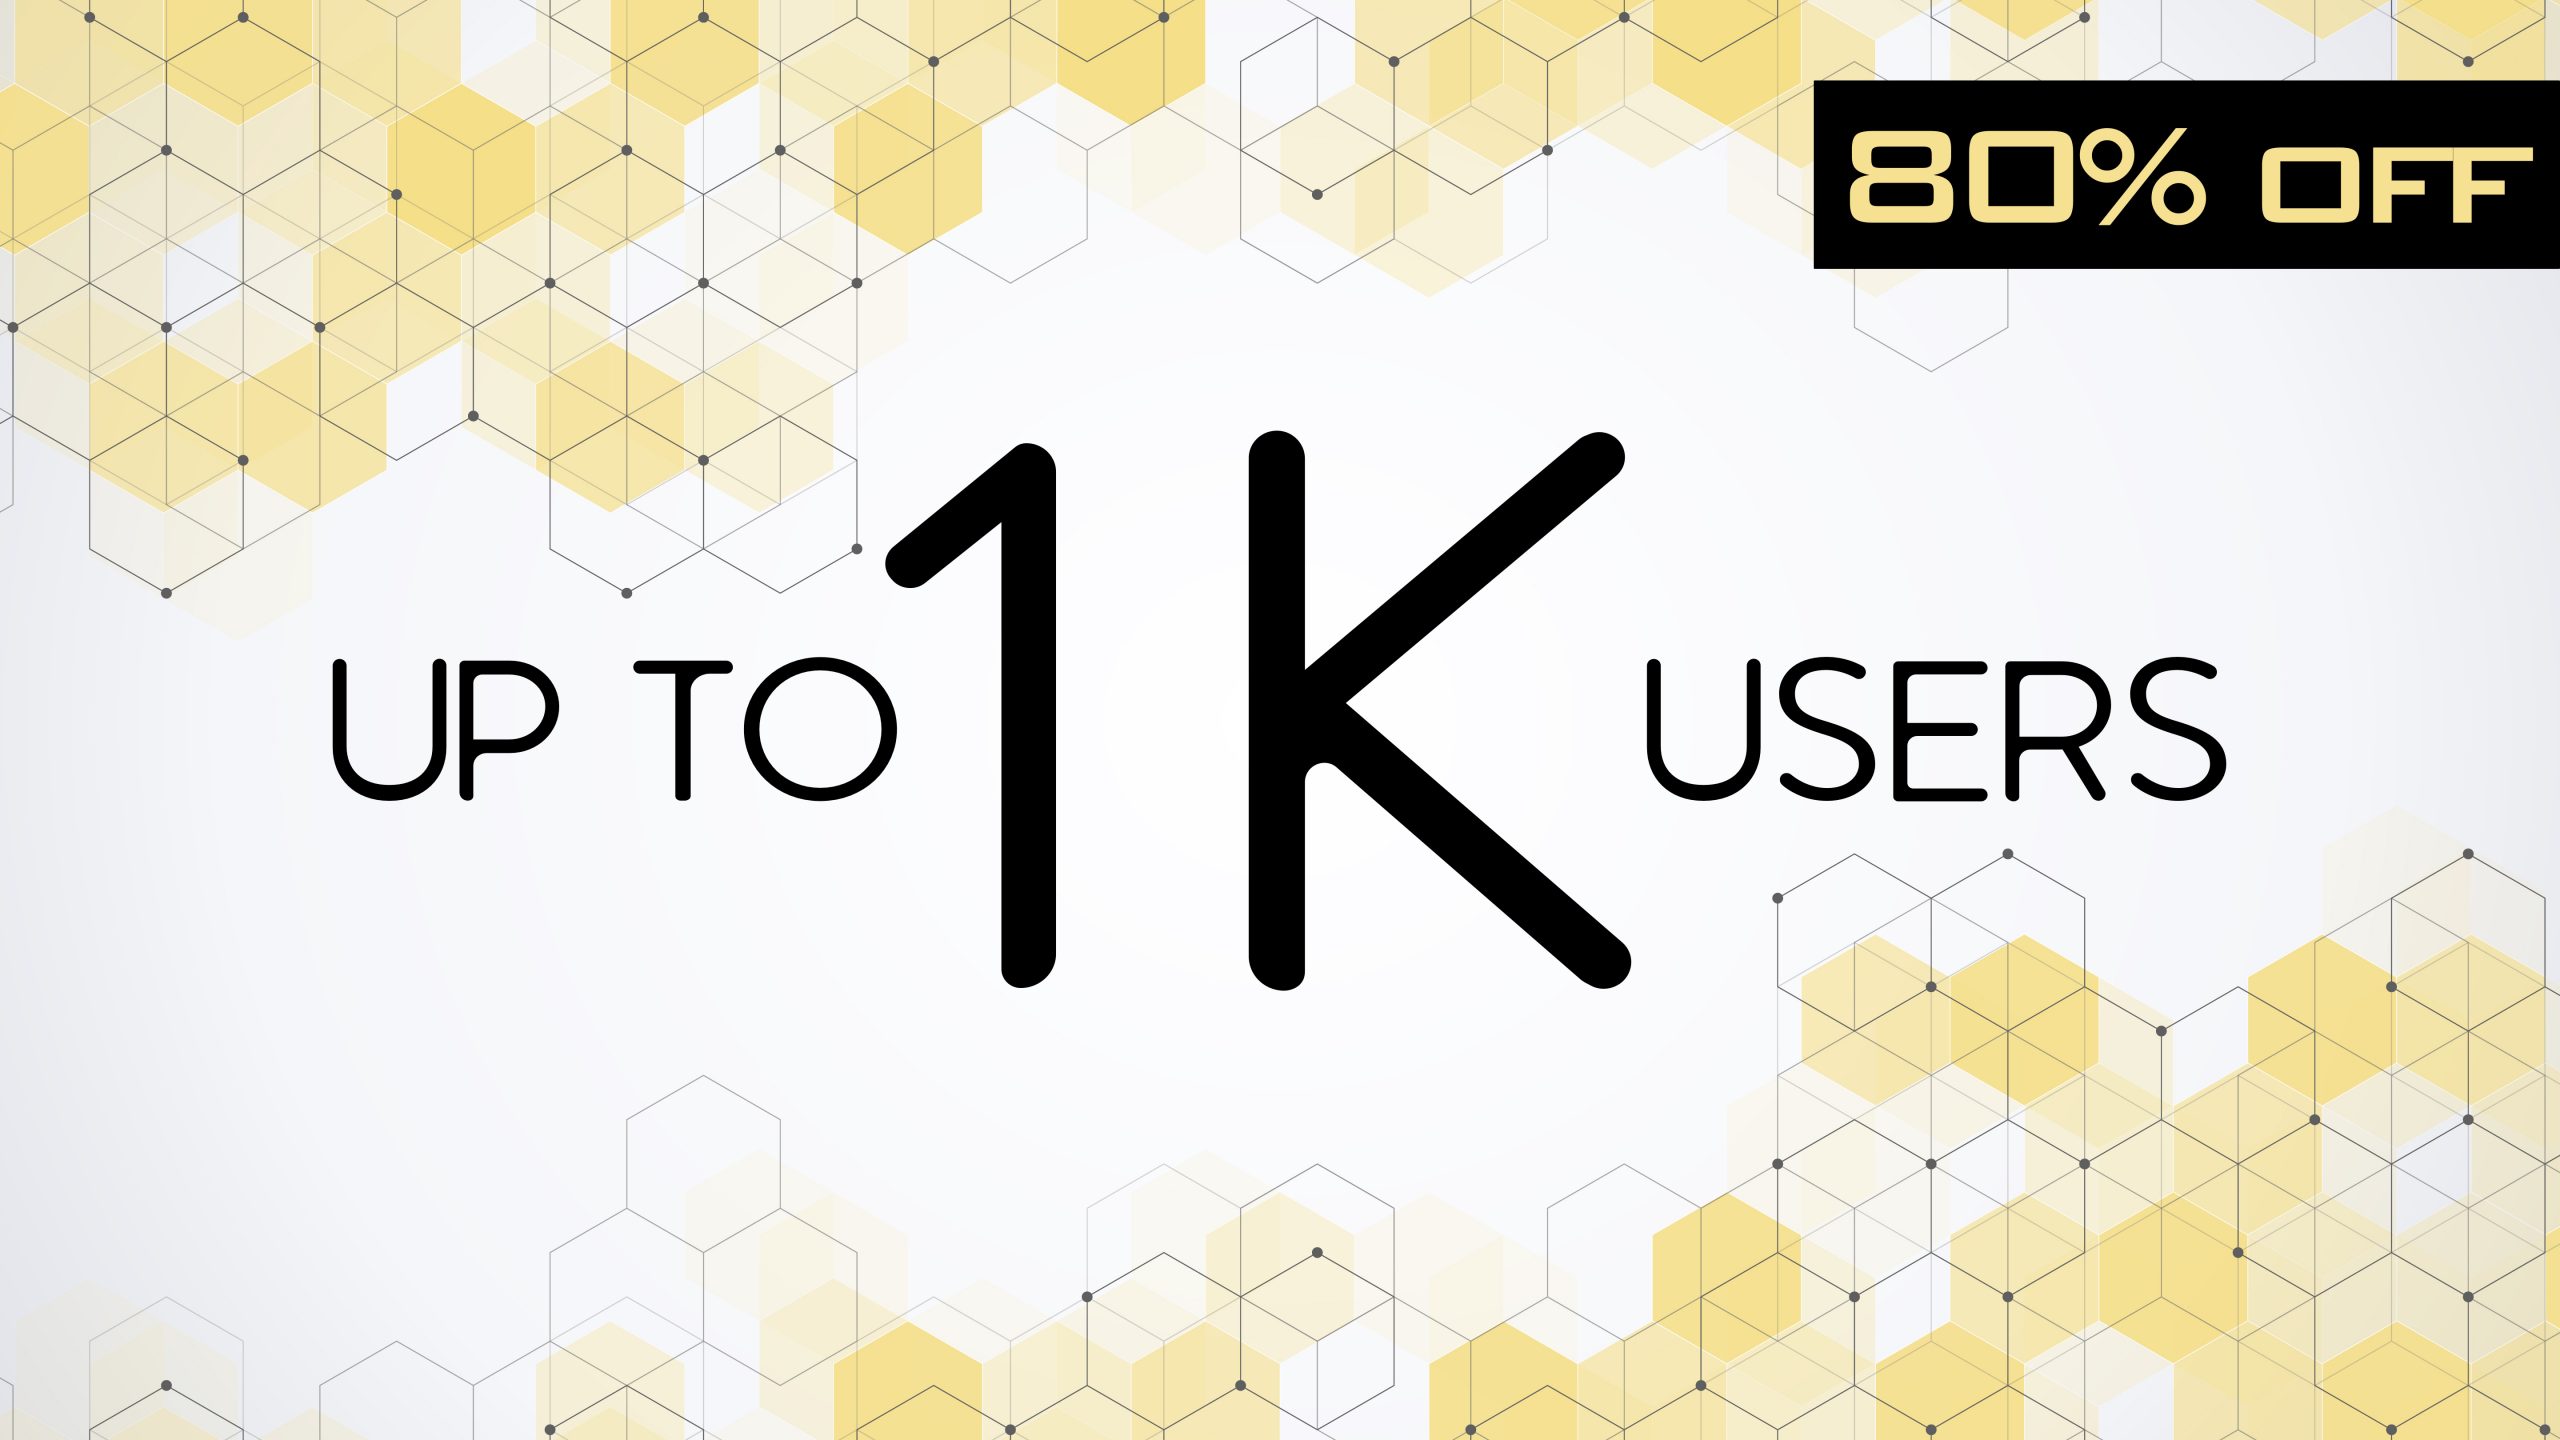 Up To 1000 Users